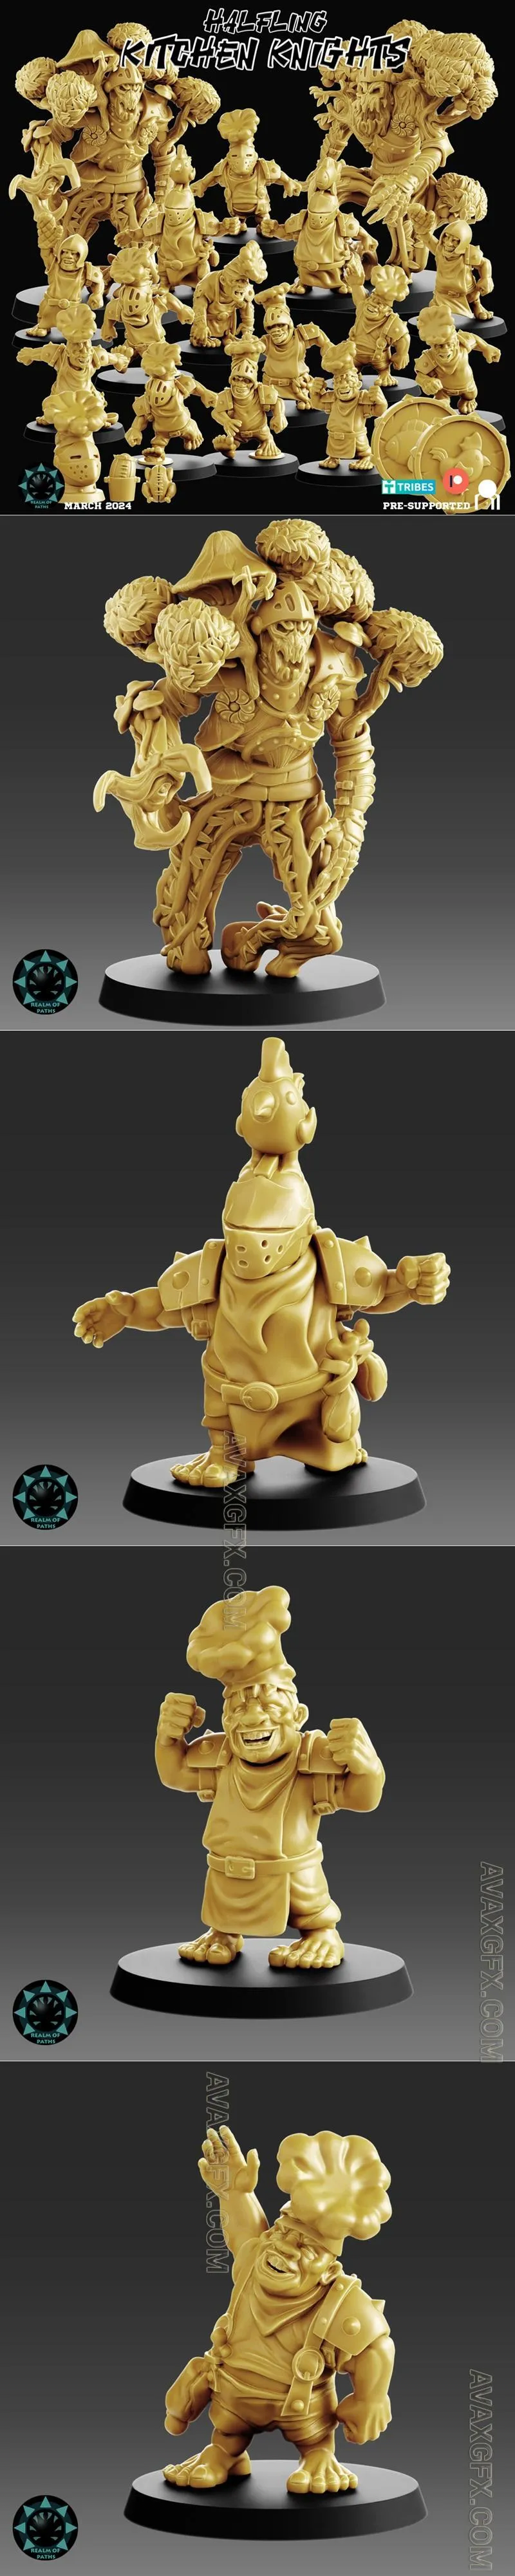 Realm of Paths - HALFLINGS - Kitchen Knights - STL 3D Model